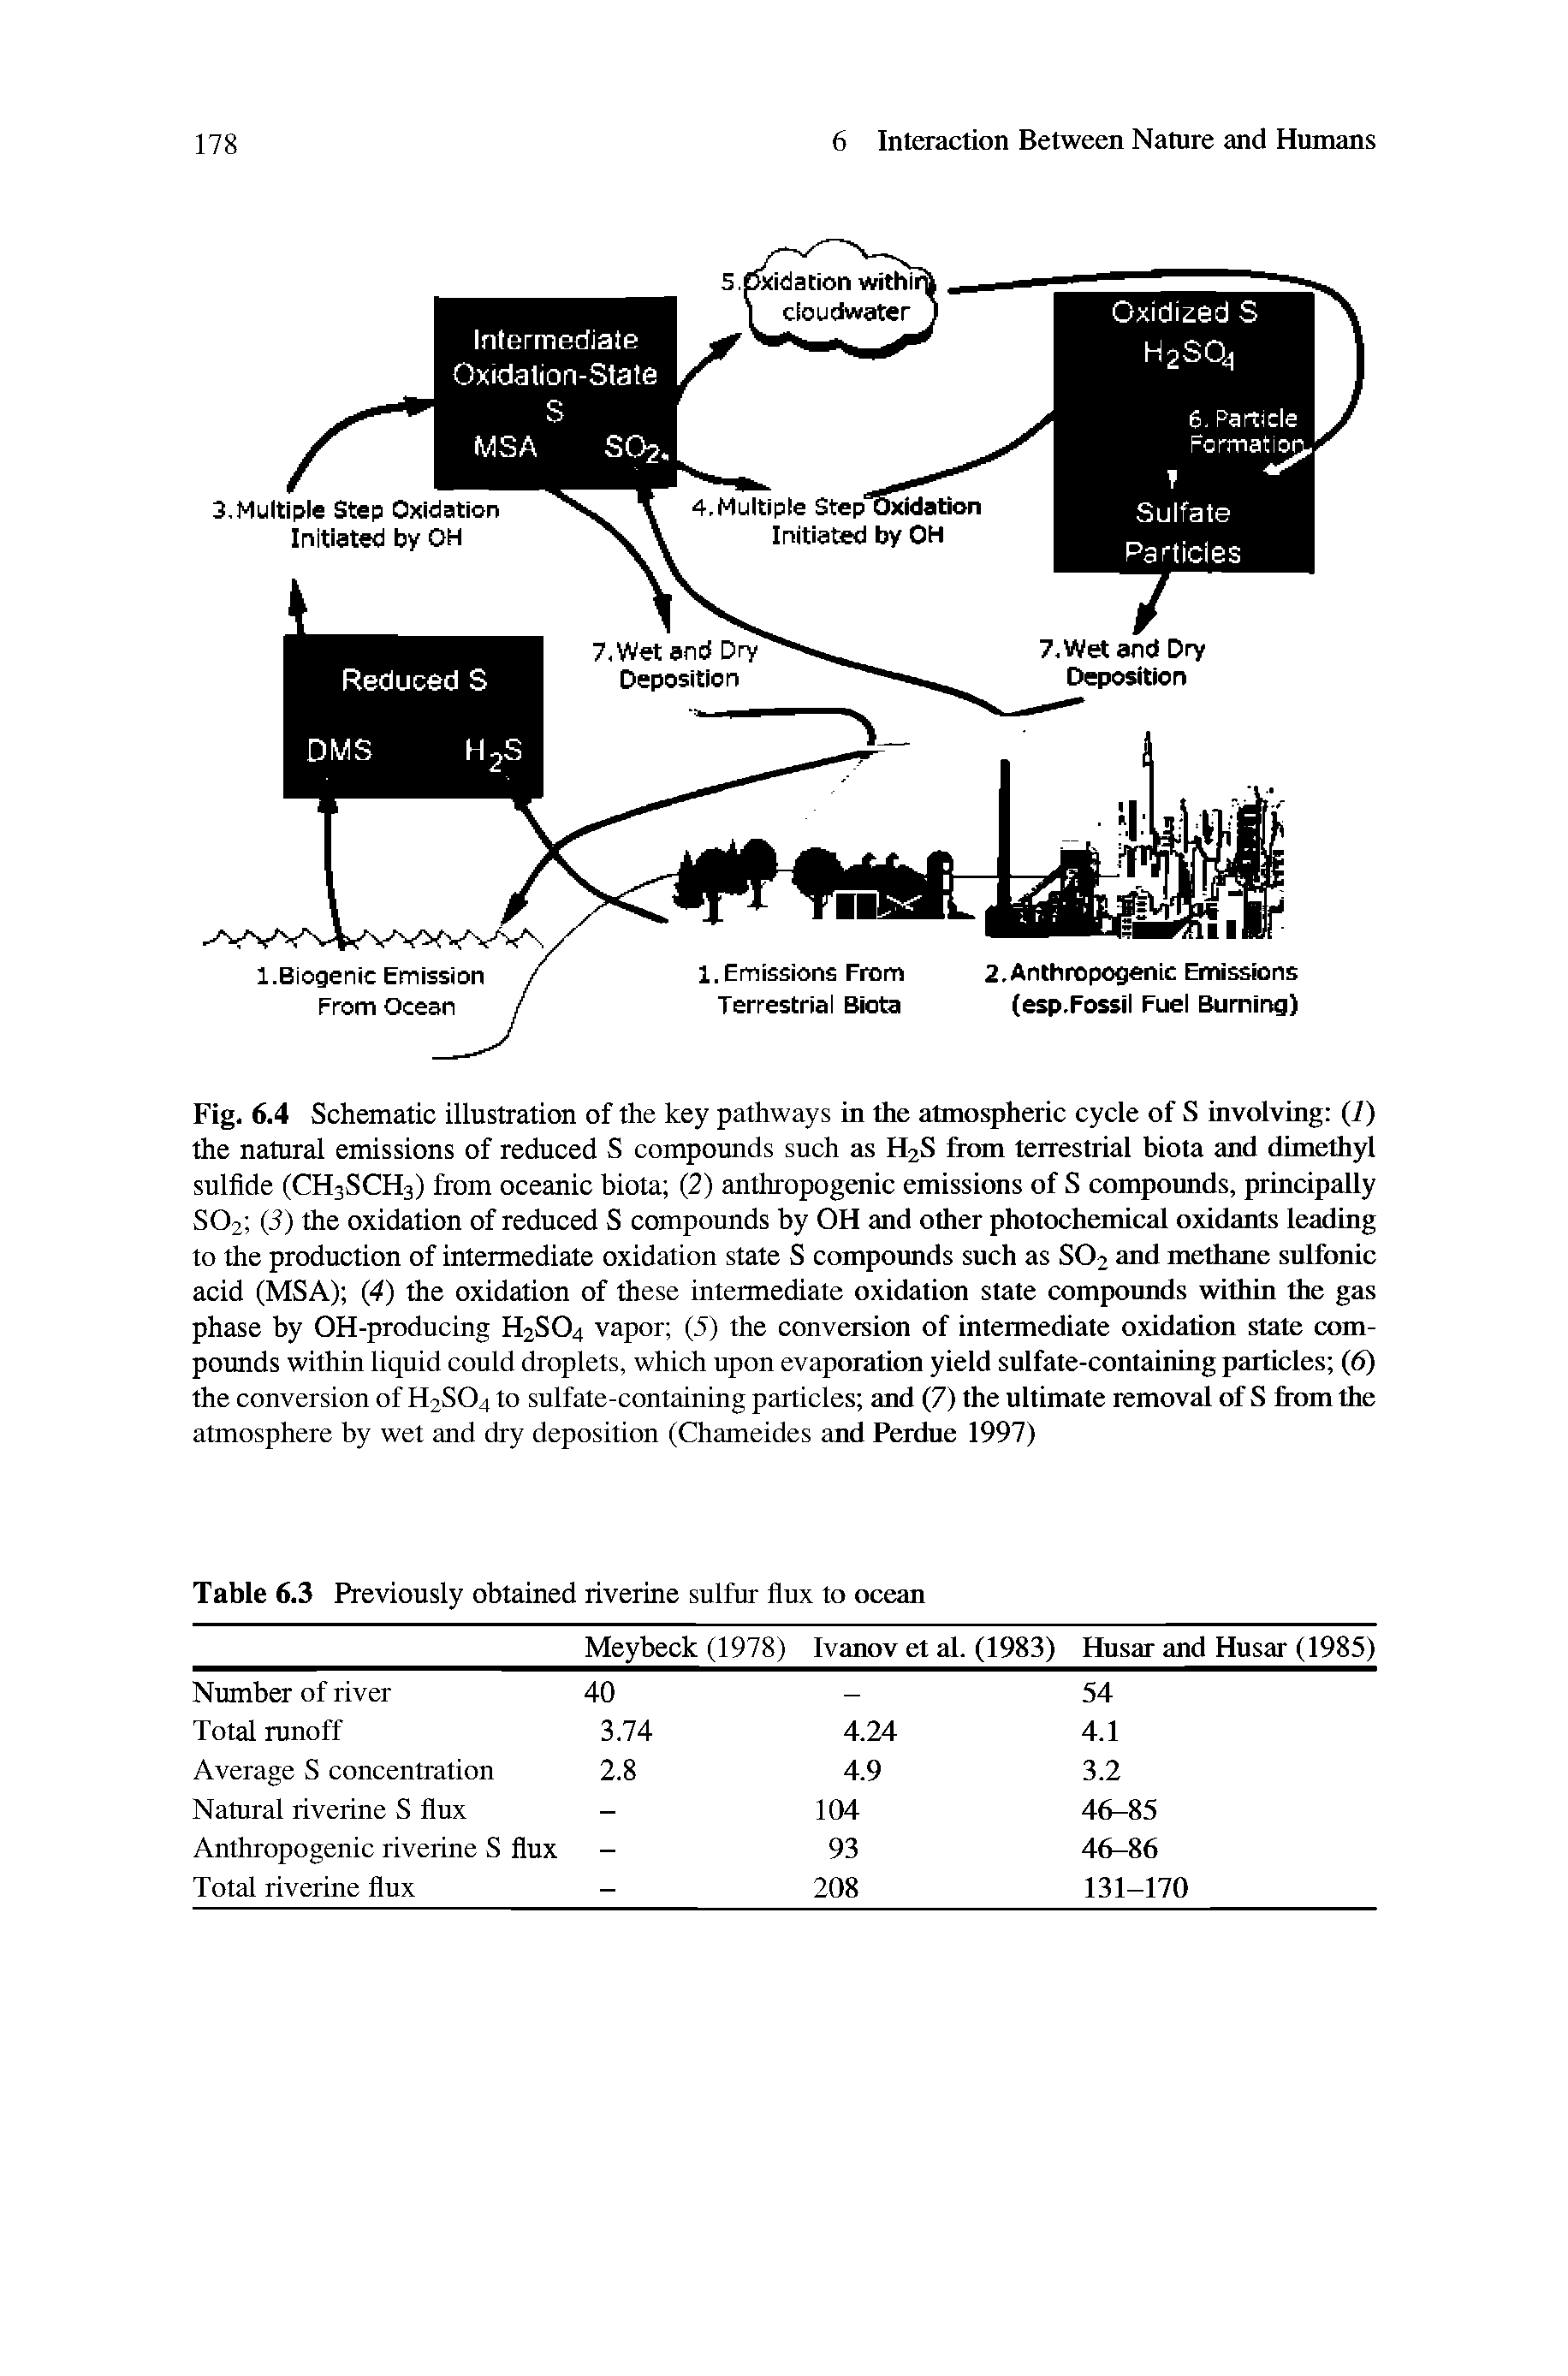 Fig. 6.4 Schematic illustration of the key pathways in the atmospheric cycle of S involving (7) the natural emissions of reduced S compounds such as H2S frran terrestrial biota and dimethyl sulfide (CH3SCH3) from oceanic biota (2) anthropogenic emissions of S compounds, principally SO2 (3) the oxidation of reduced S compounds by OH and other photochemical oxidants leading to the production of intermediate oxidation state S compotmds such as SO2 and methane sulfonic acid (MSA) (4) the oxidation of these mtermediate oxidation state compounds within the gas phase by OH-producing H2SO4 vapor (5) the conversion of intermediate oxidation state compounds within liquid could droplets, which upon evaporation yield sulfate-containing particles (6) the conversion of H2SO4 to sulfate-containing particles and (7) the ultimate removal of S fiom the atmosphere by wet and dry deposition (Chameides and Perdue 1997)...